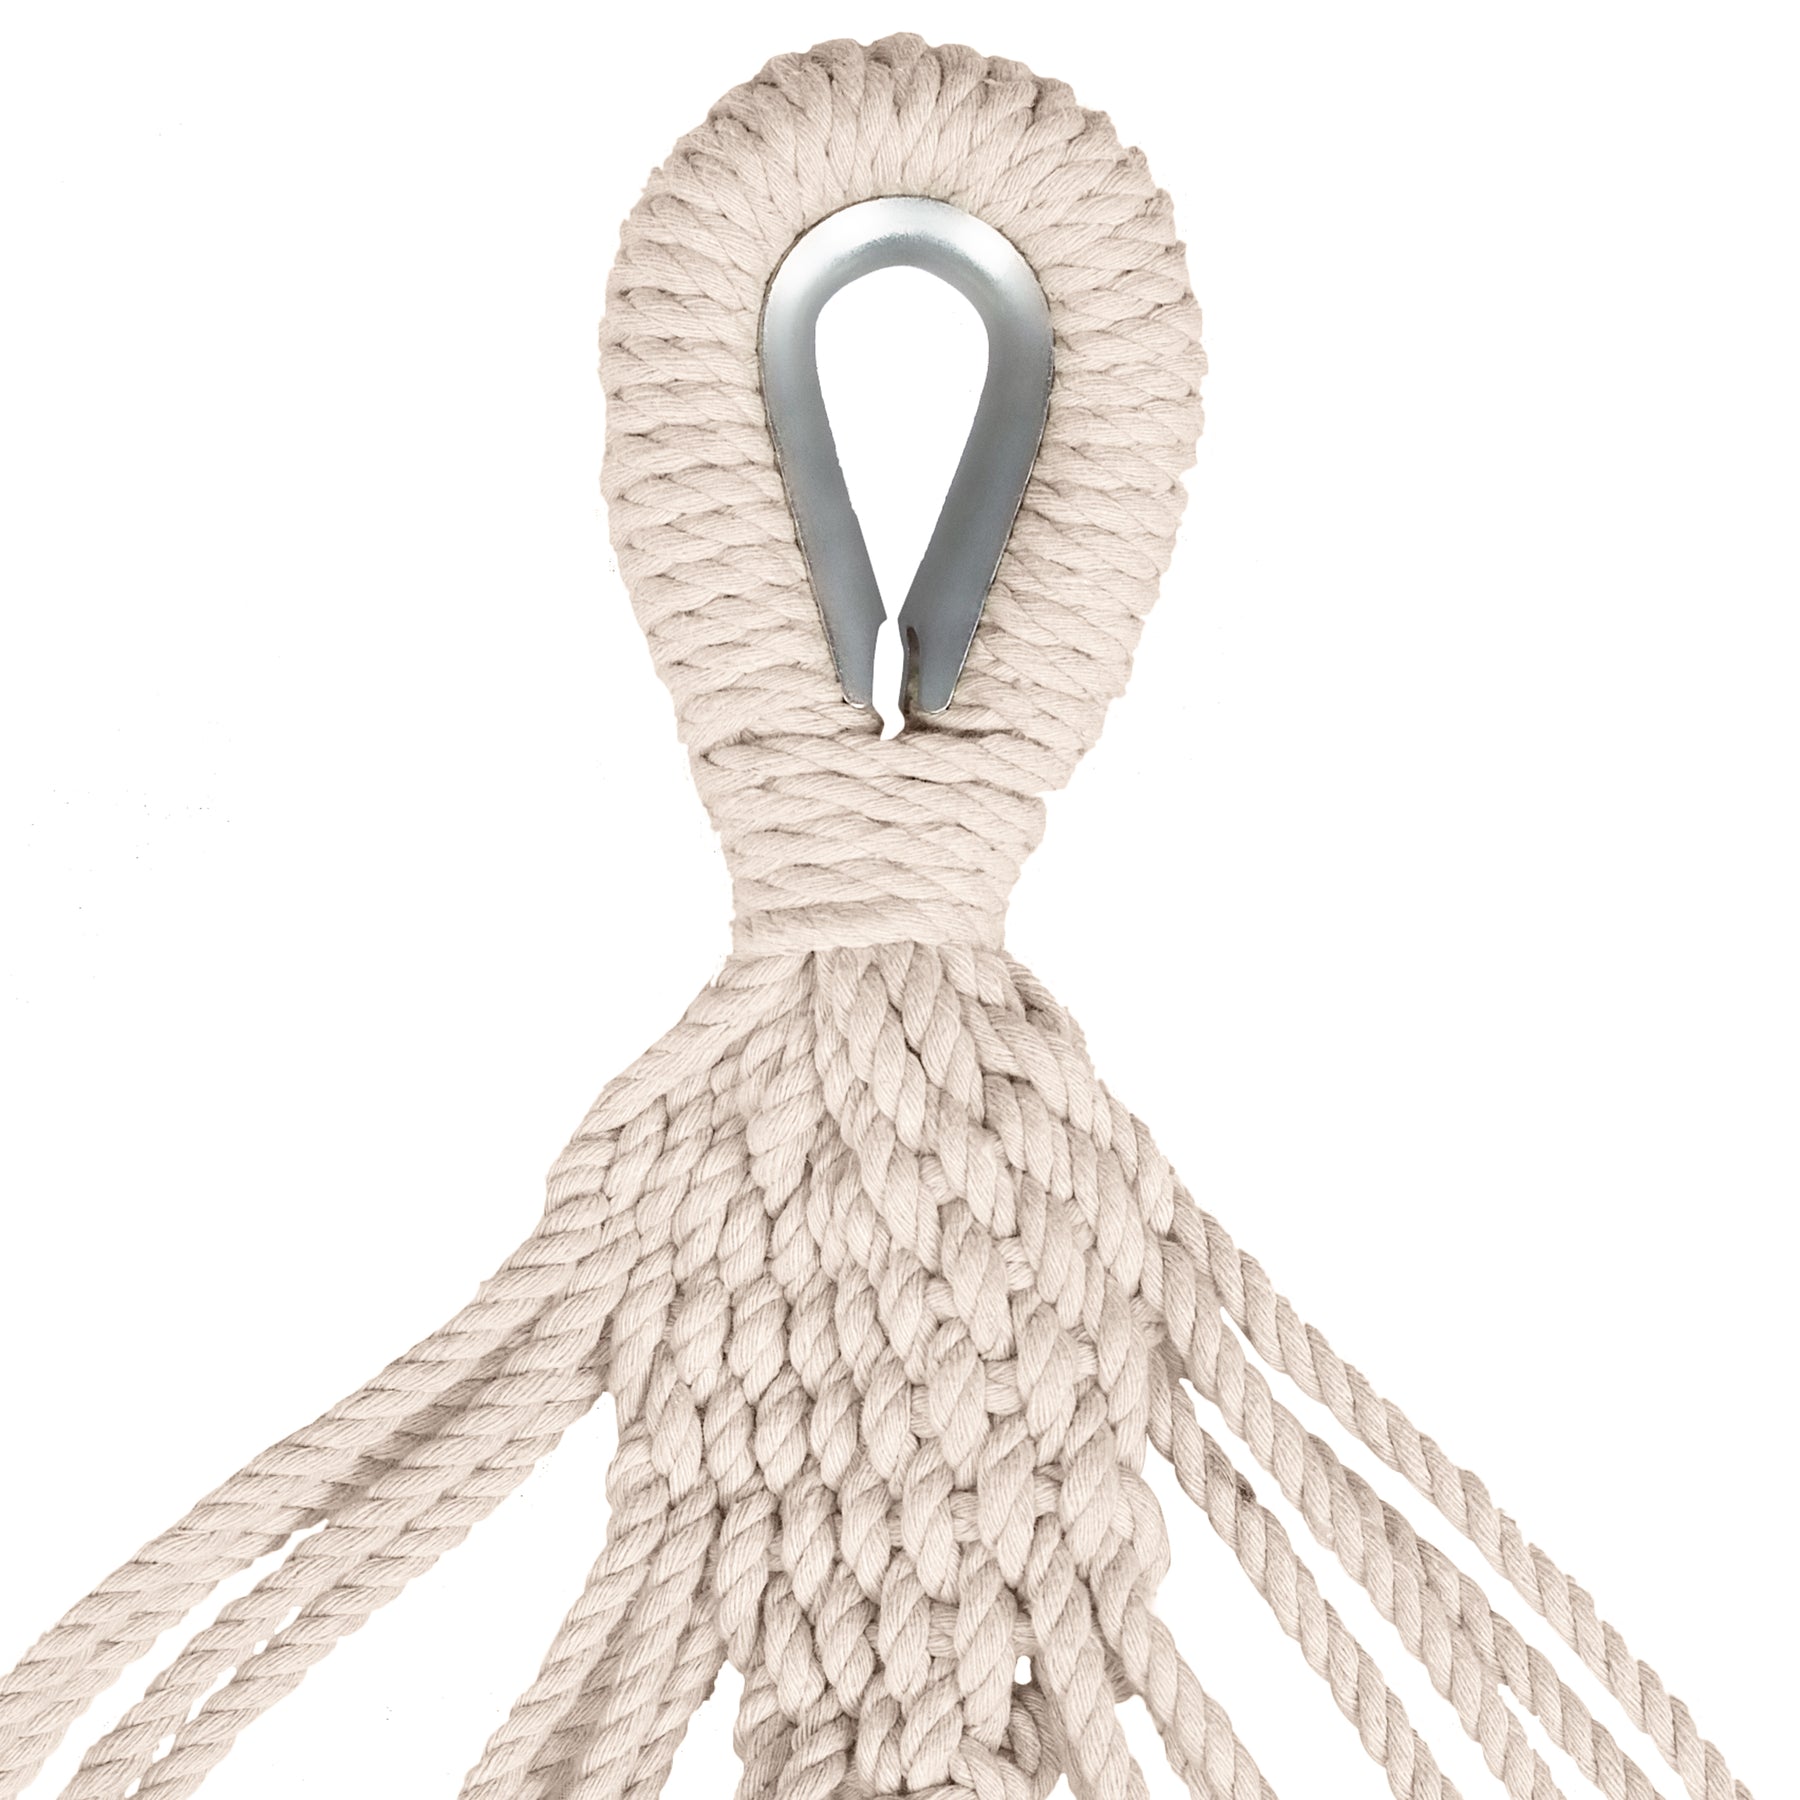 Close-up of the Rope Loop for the Bliss Hammocks Hammock in a Bag that enables it to be hanged.